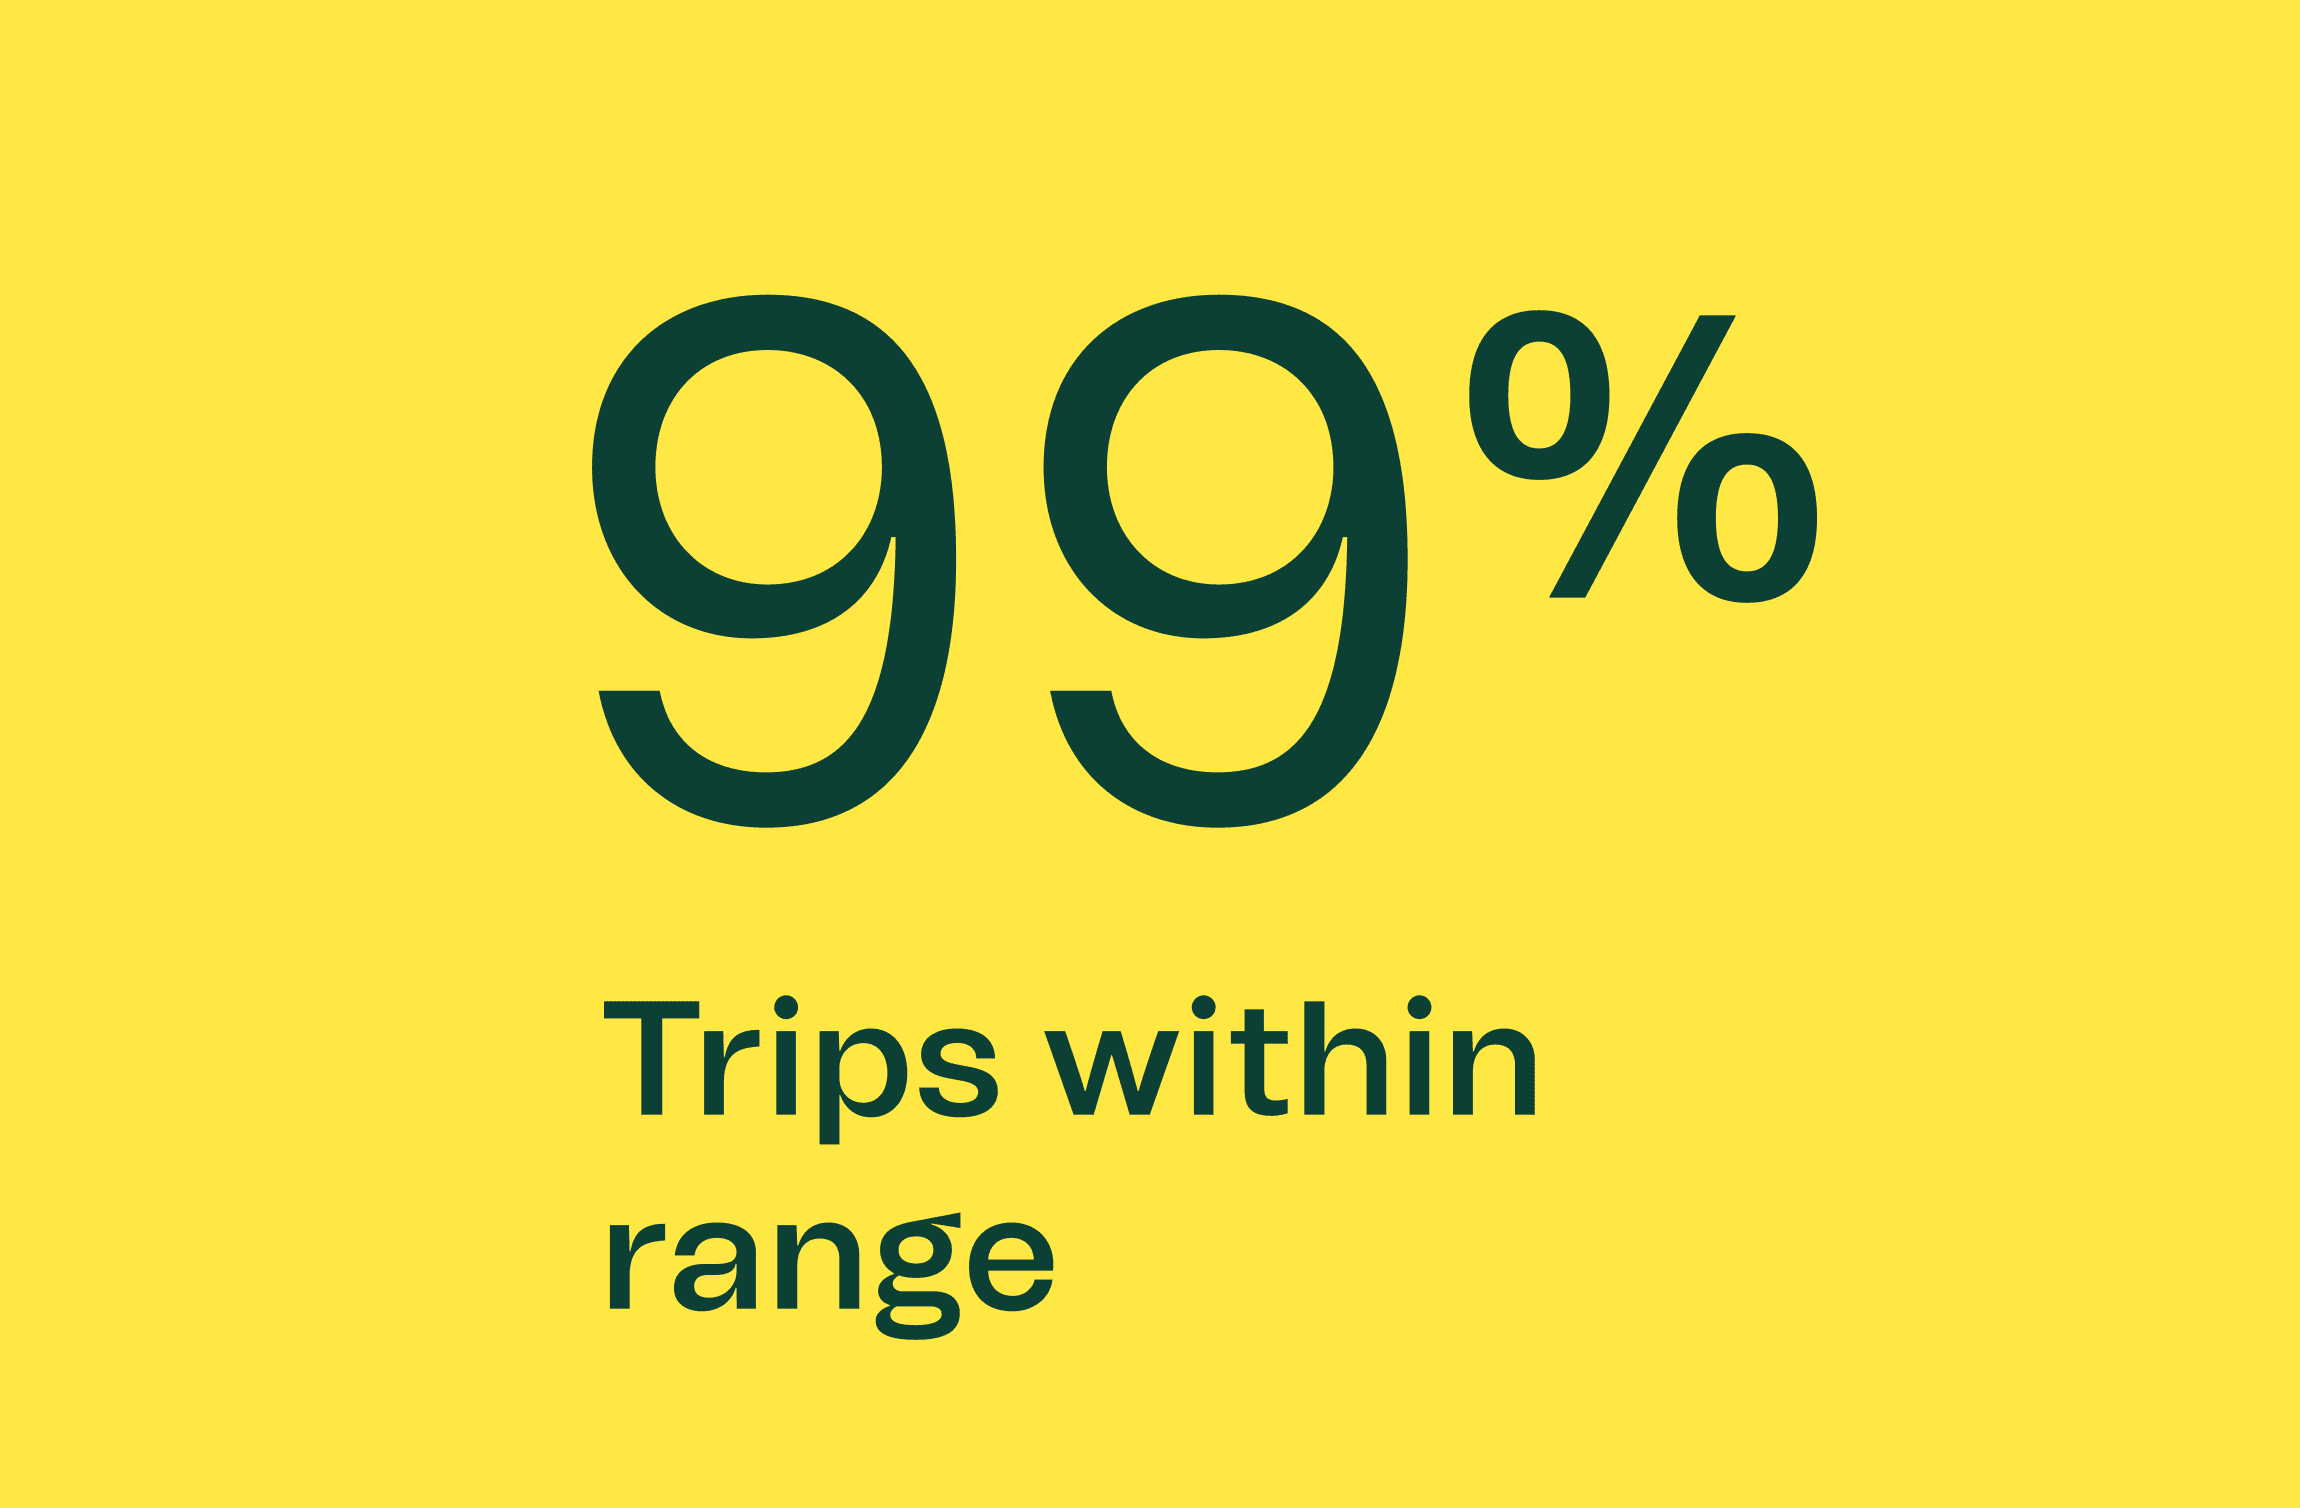 99-percent-trips-within-range.png